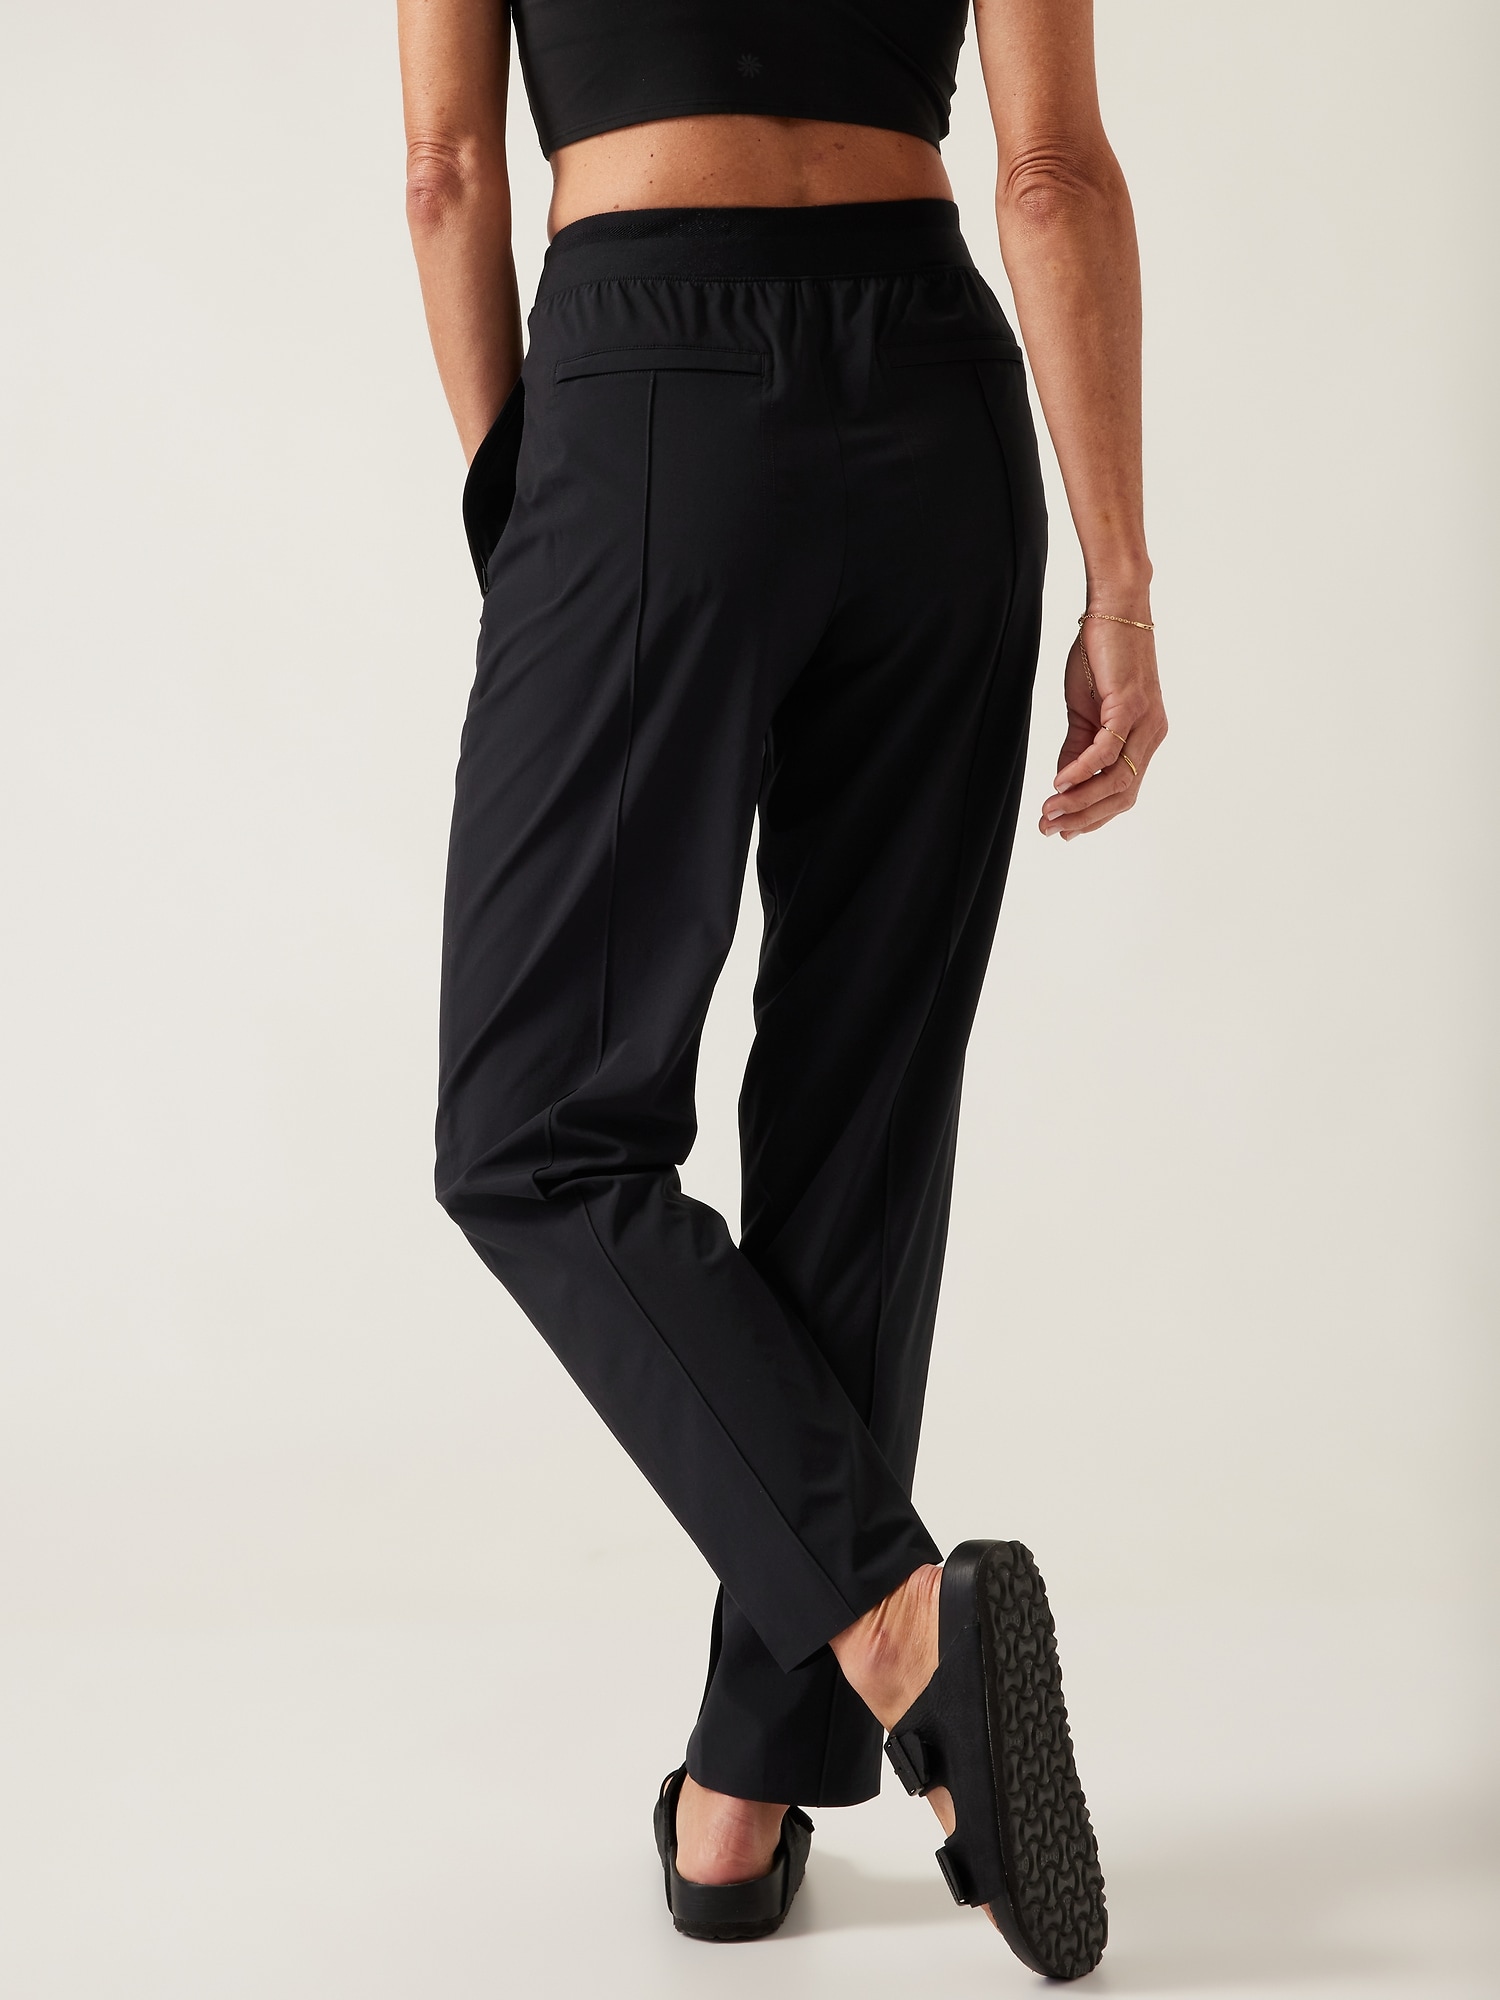 Athleta BROOKLYN HEIGHTS PANT - Outdoor trousers - tapestry gold